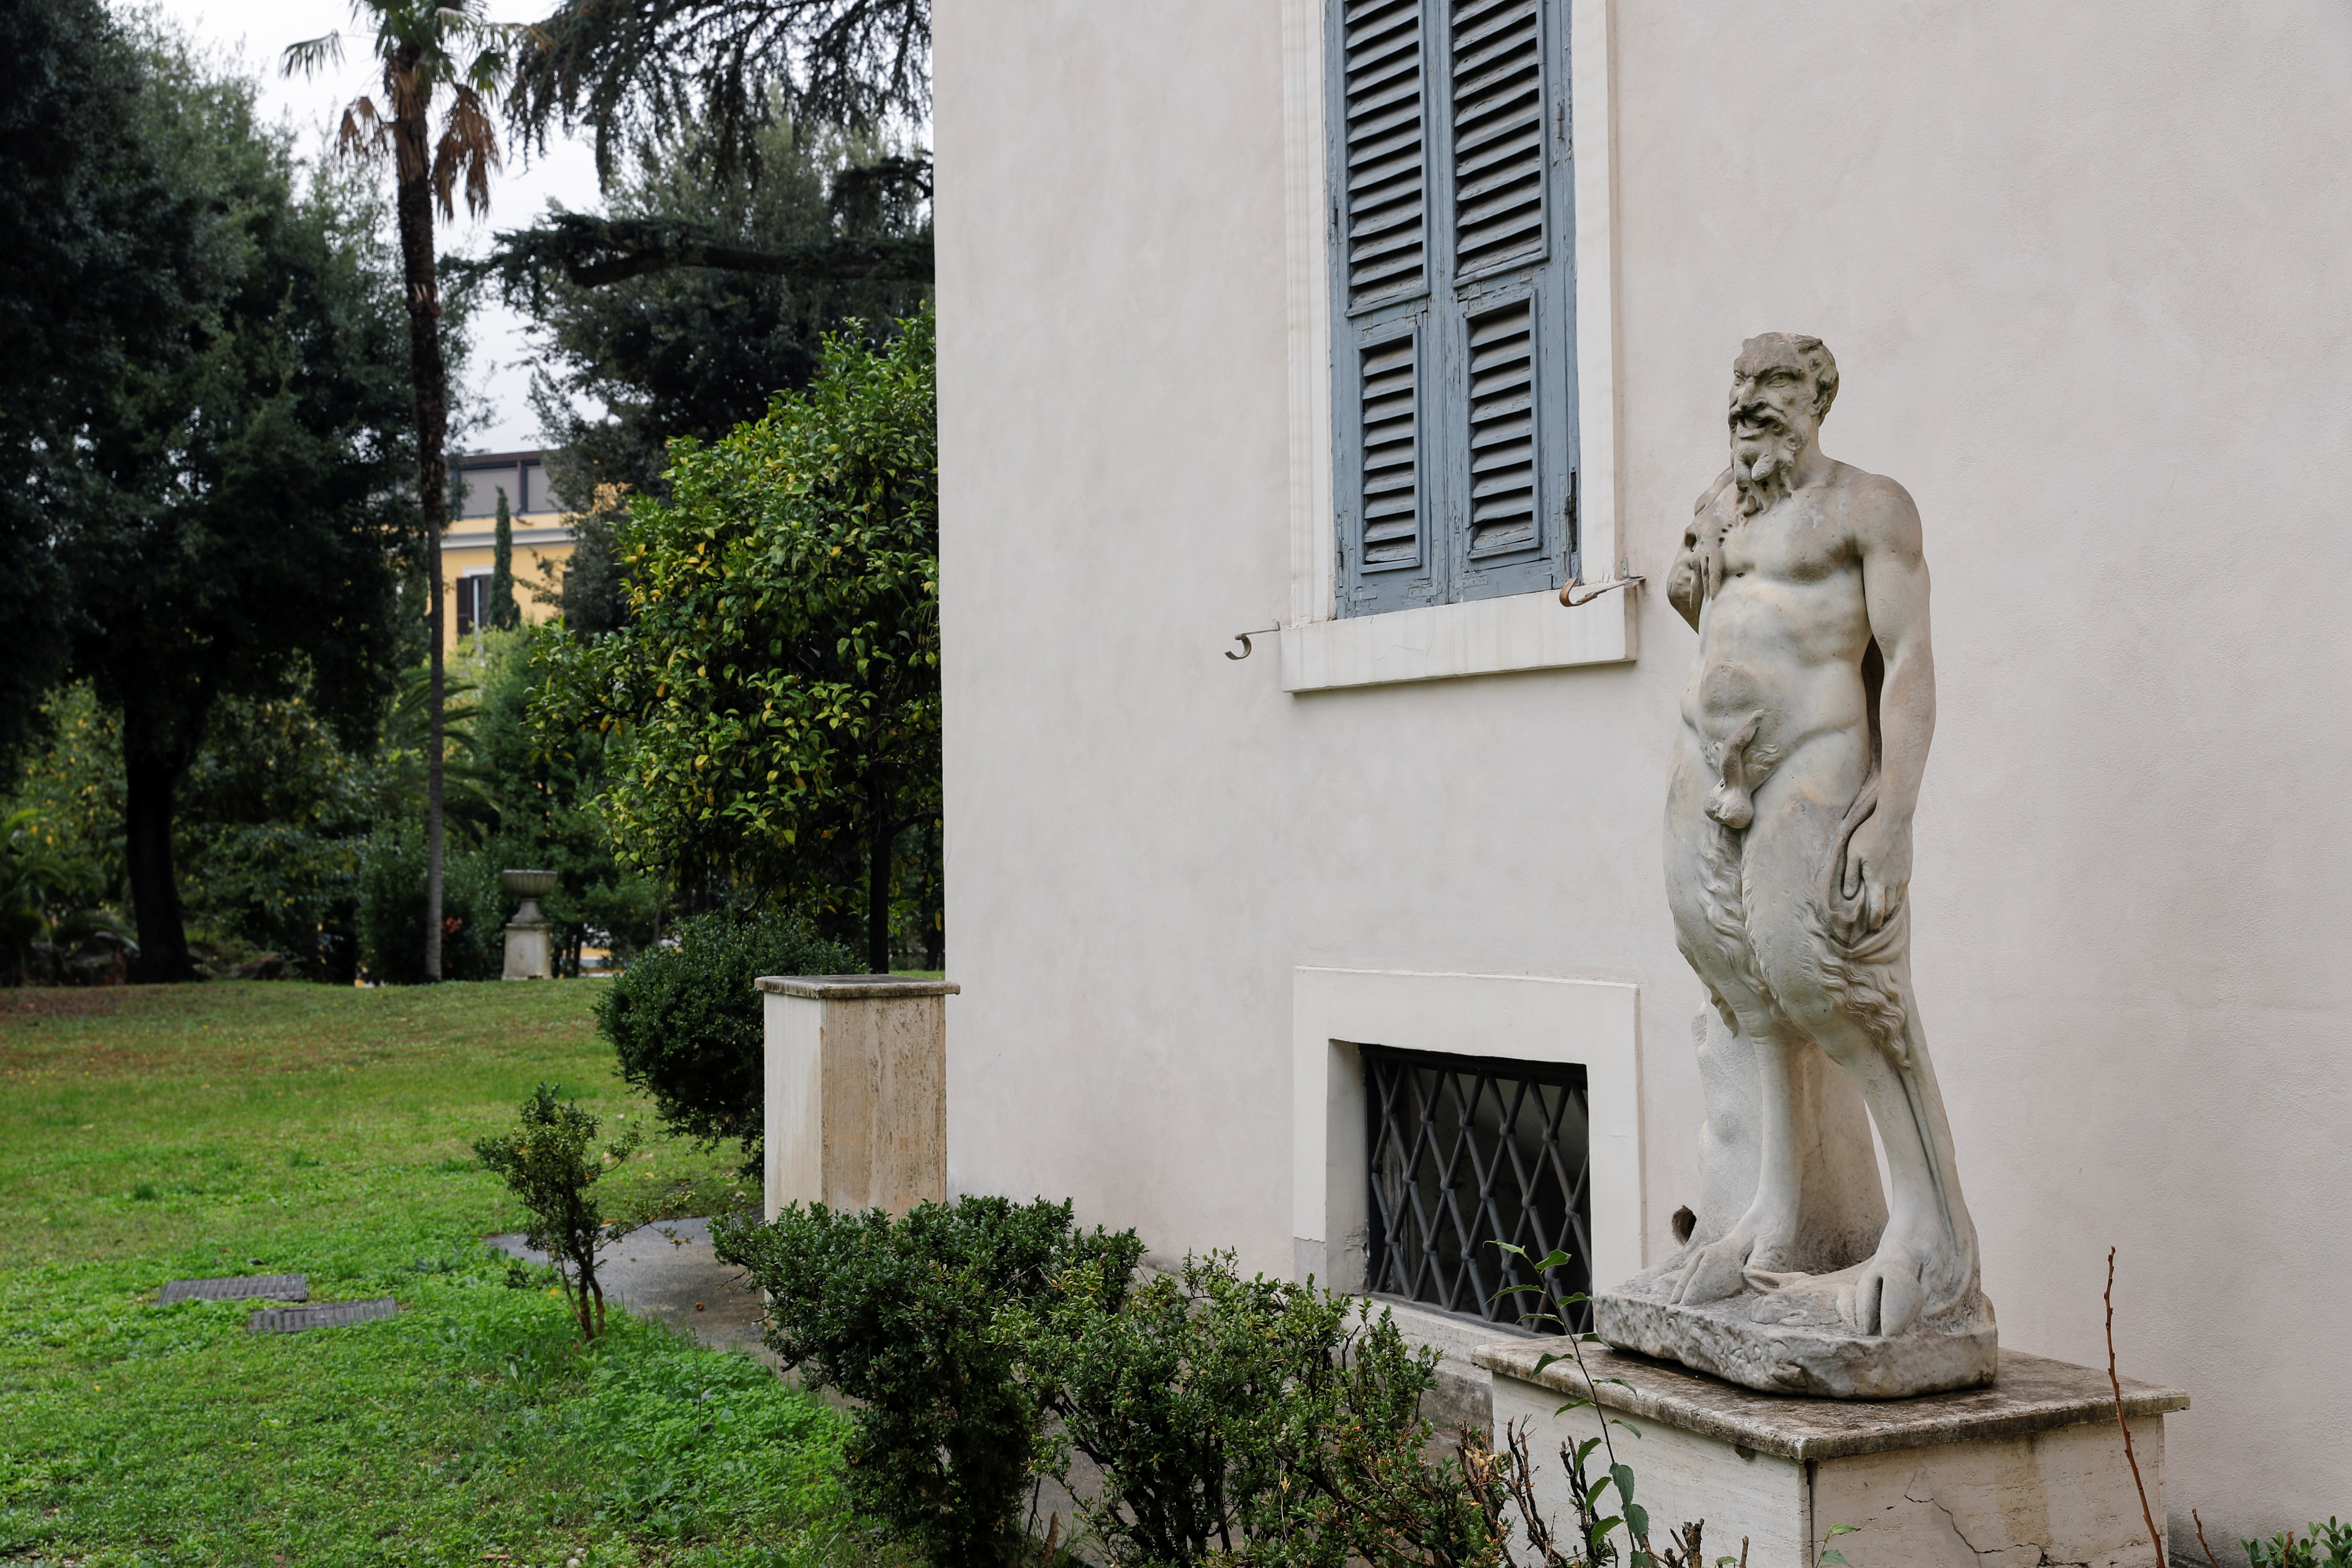 A statue of Pan by Michelangelo is seen outside Villa Aurora, a building that boasts Caravaggio's only ceiling mural, which is up for auction in January with an opening bid set at 471 million euros, in Rome, Italy, November 16, 2021. REUTERS/Remo Casilli